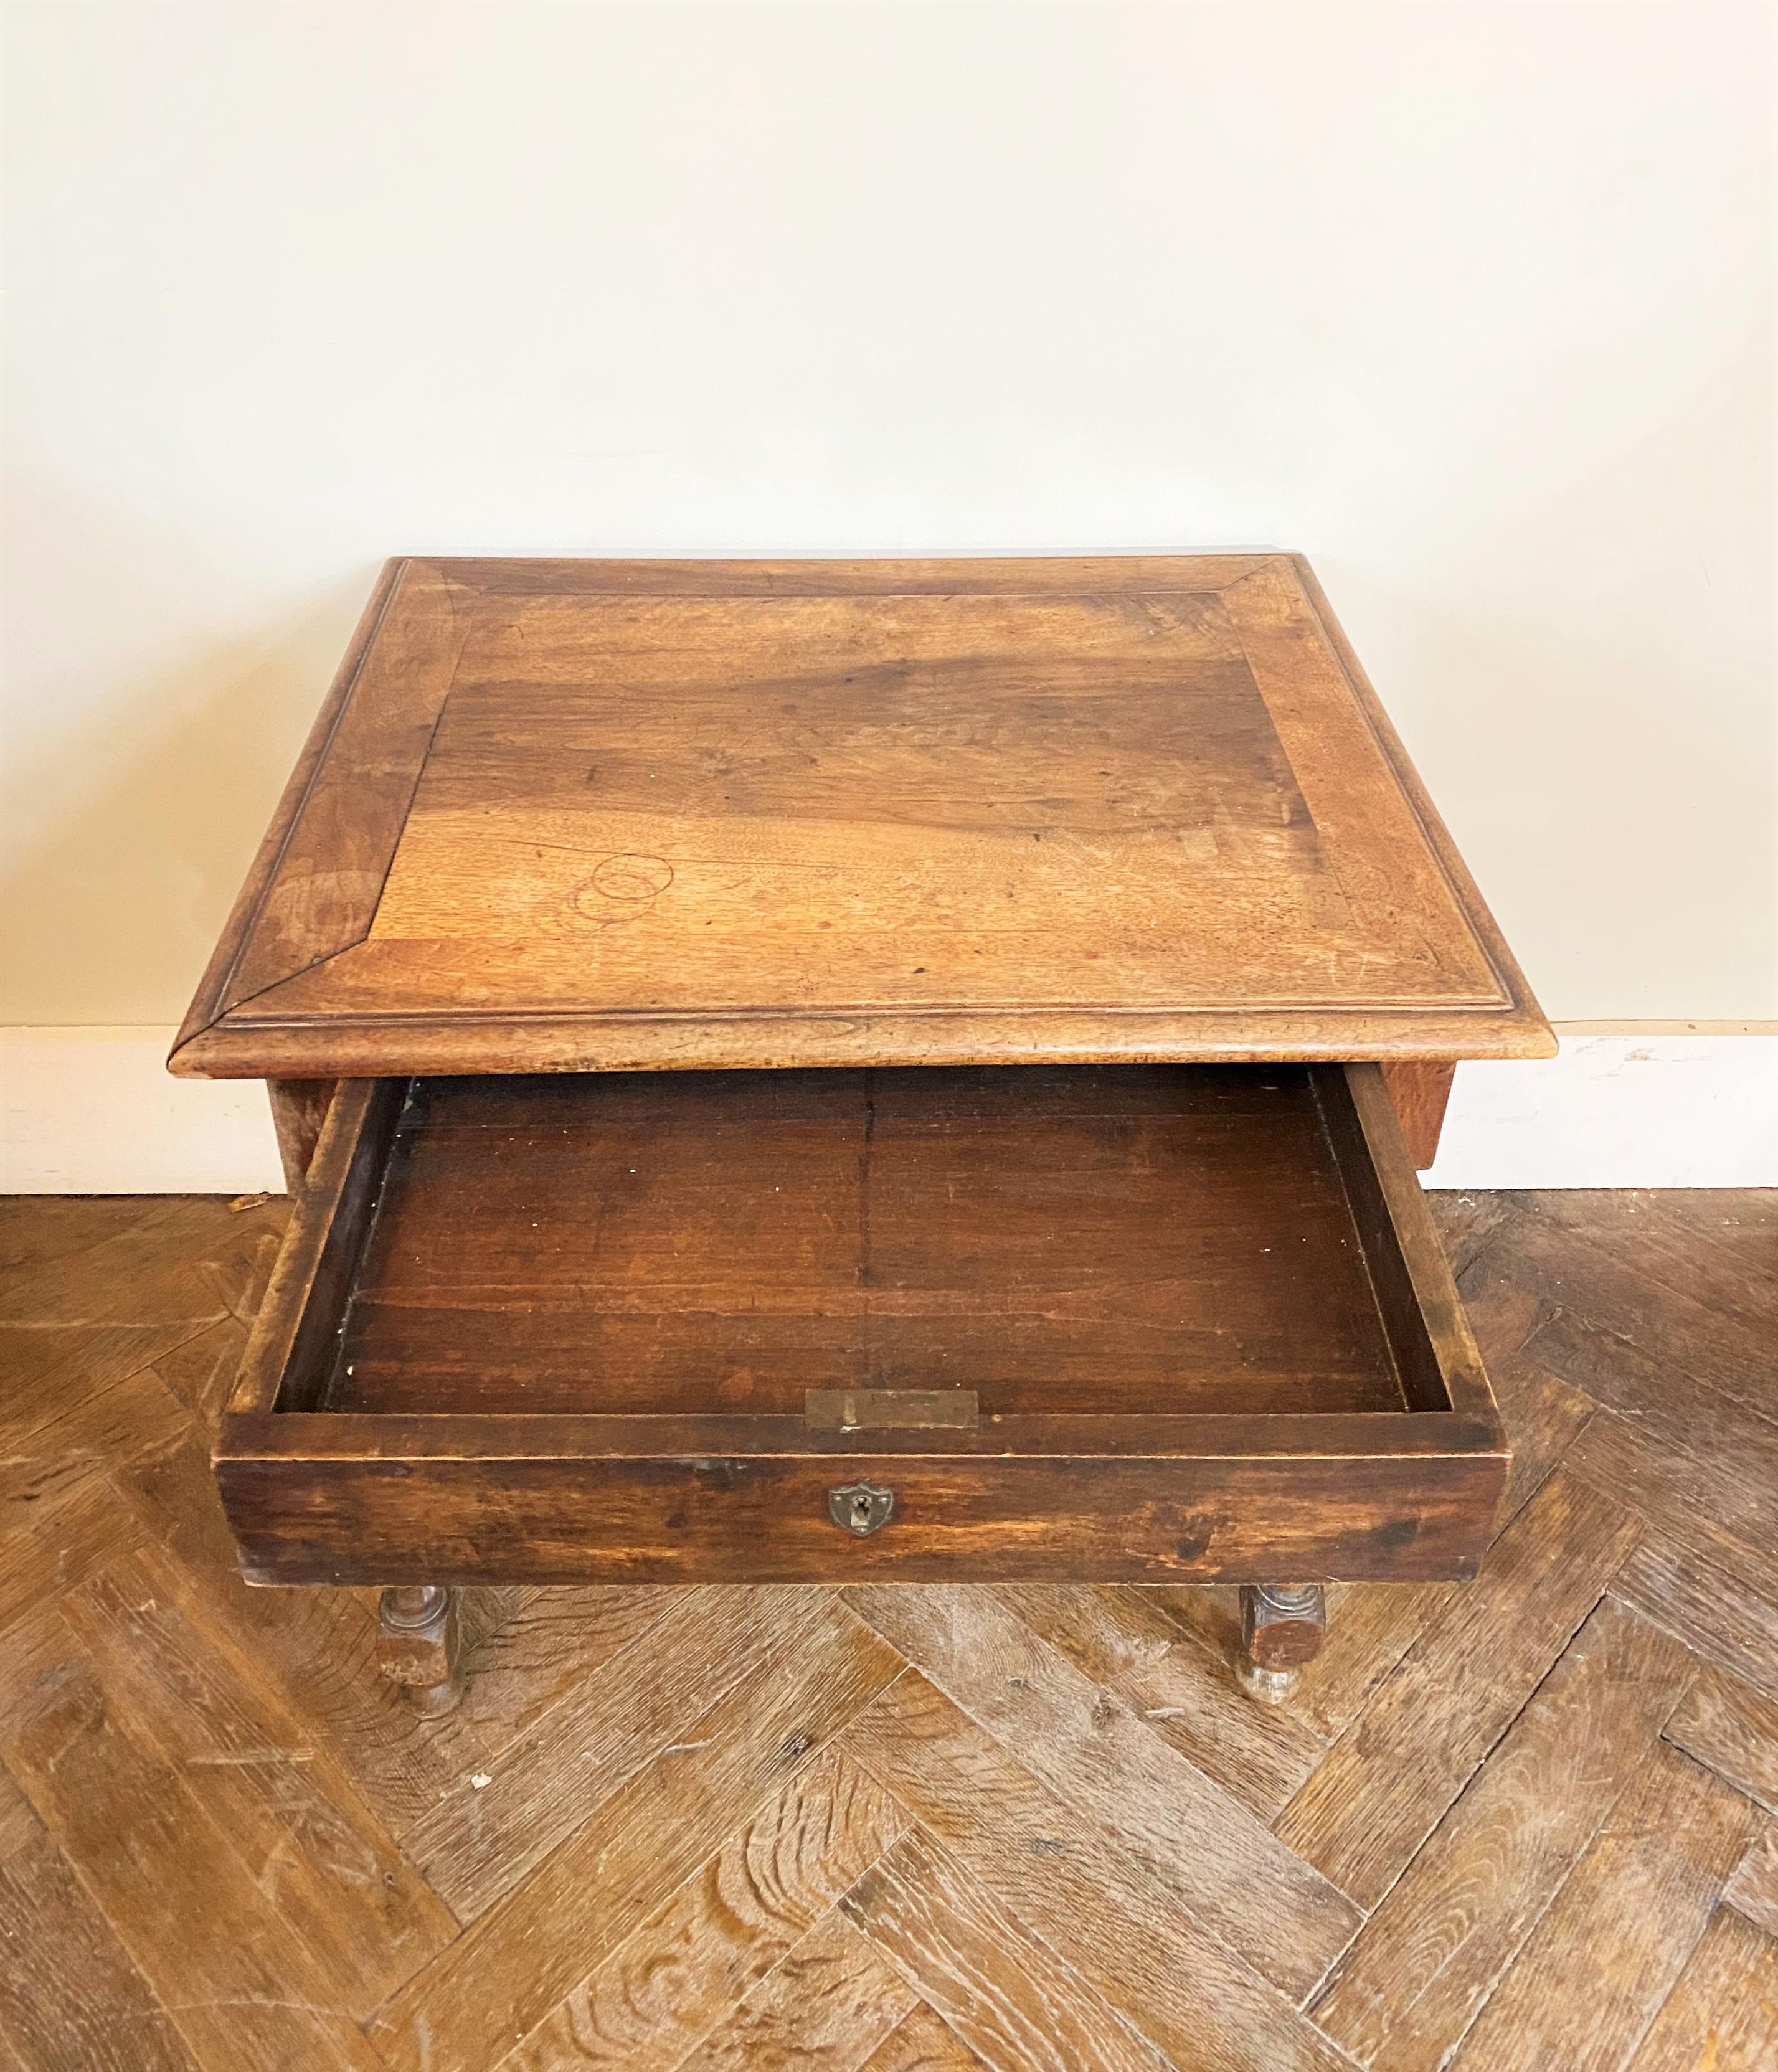 Magnificent Louis 13 style desk from the 17th century. The legs are turned in a spiral, as well as the 